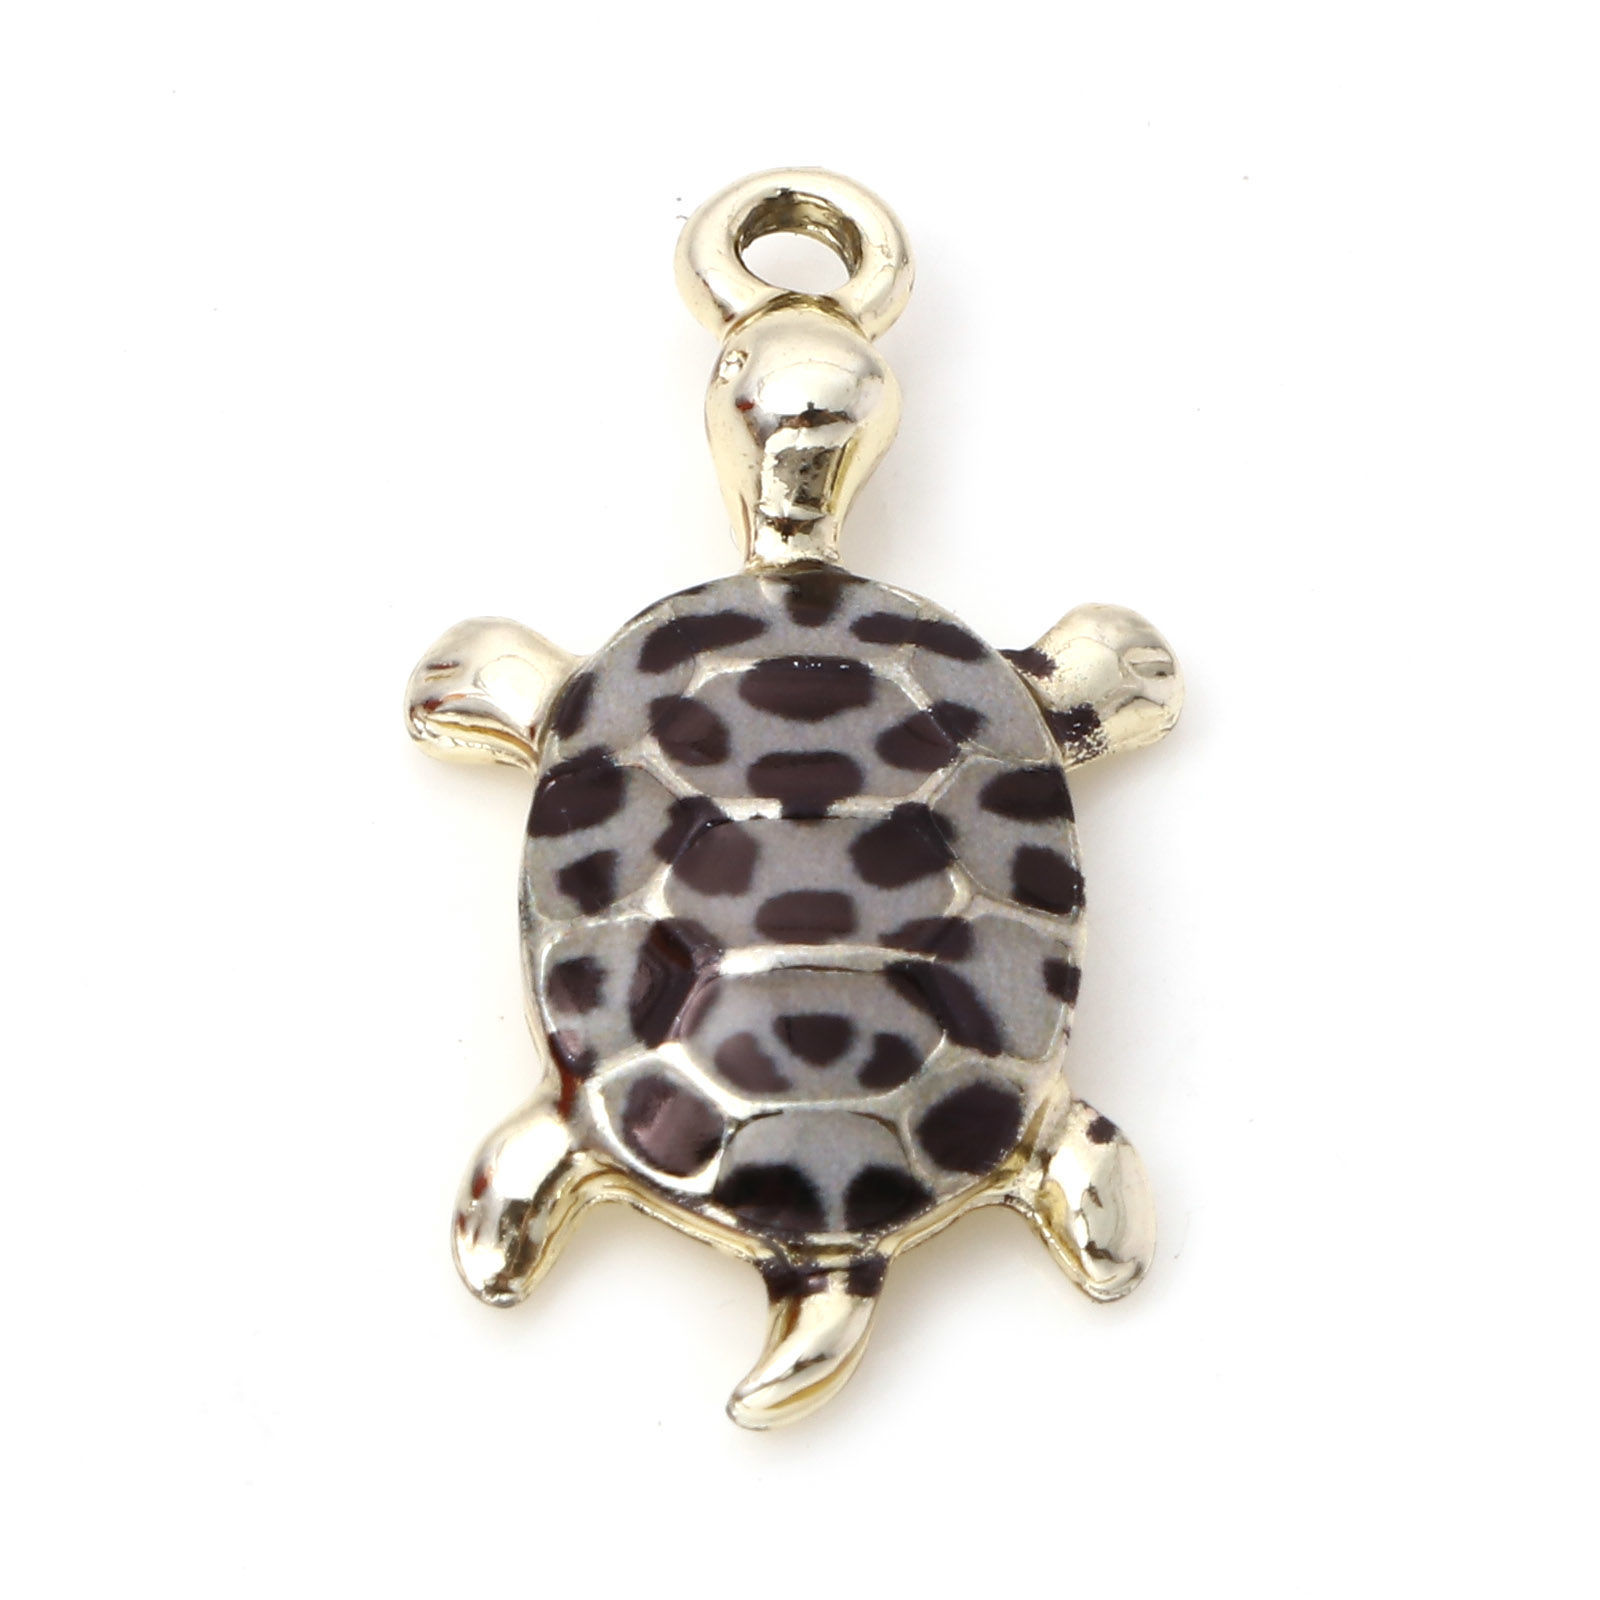 Picture of Zinc Based Alloy Ocean Jewelry Charms Gold Plated Gray Sea Turtle Animal Spot Enamel 24mm x 14mm, 10 PCs